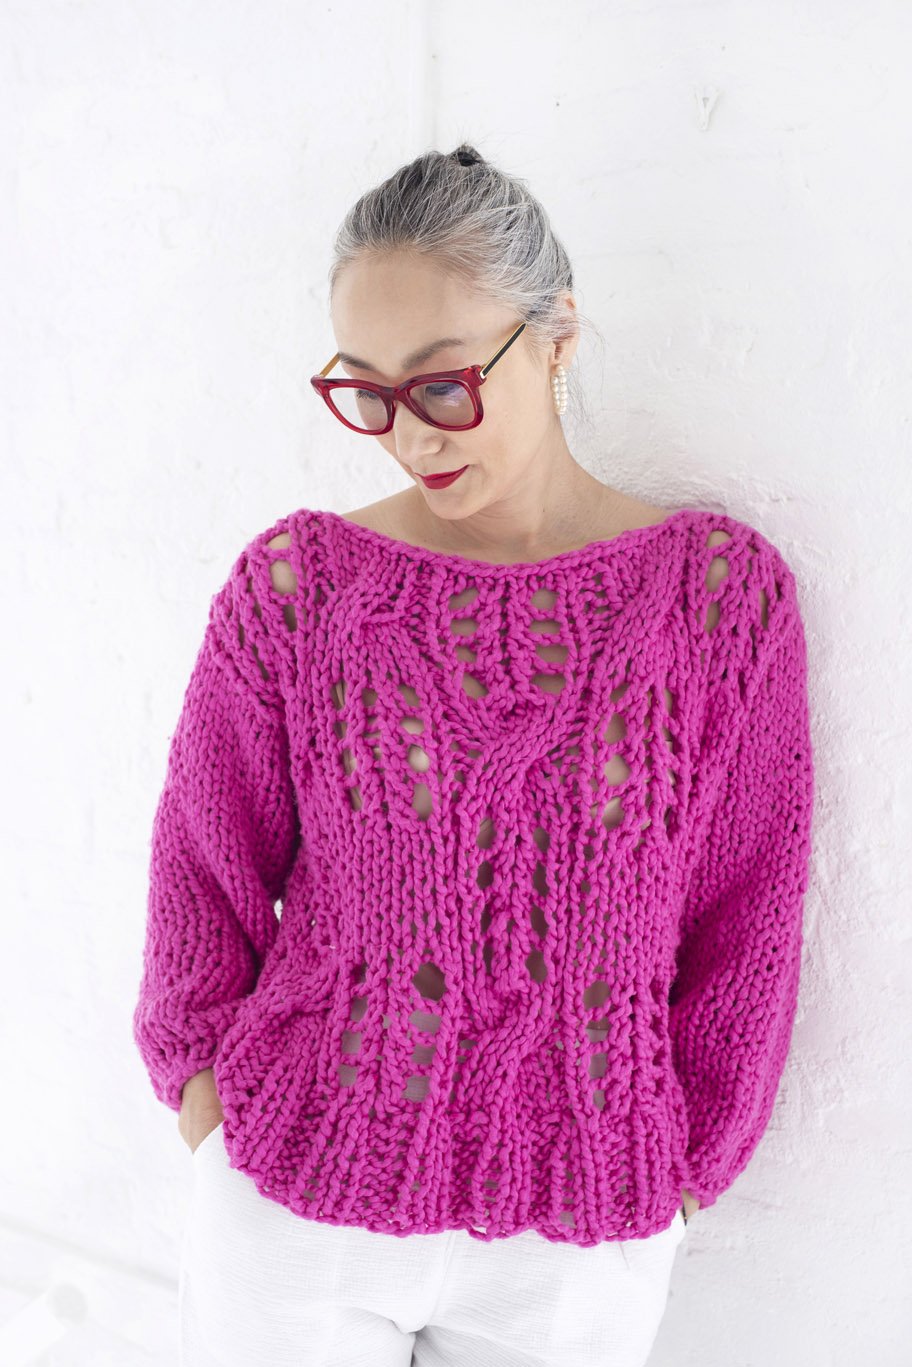 Off the Shoulder Sweater PATTERN- Big Cotton